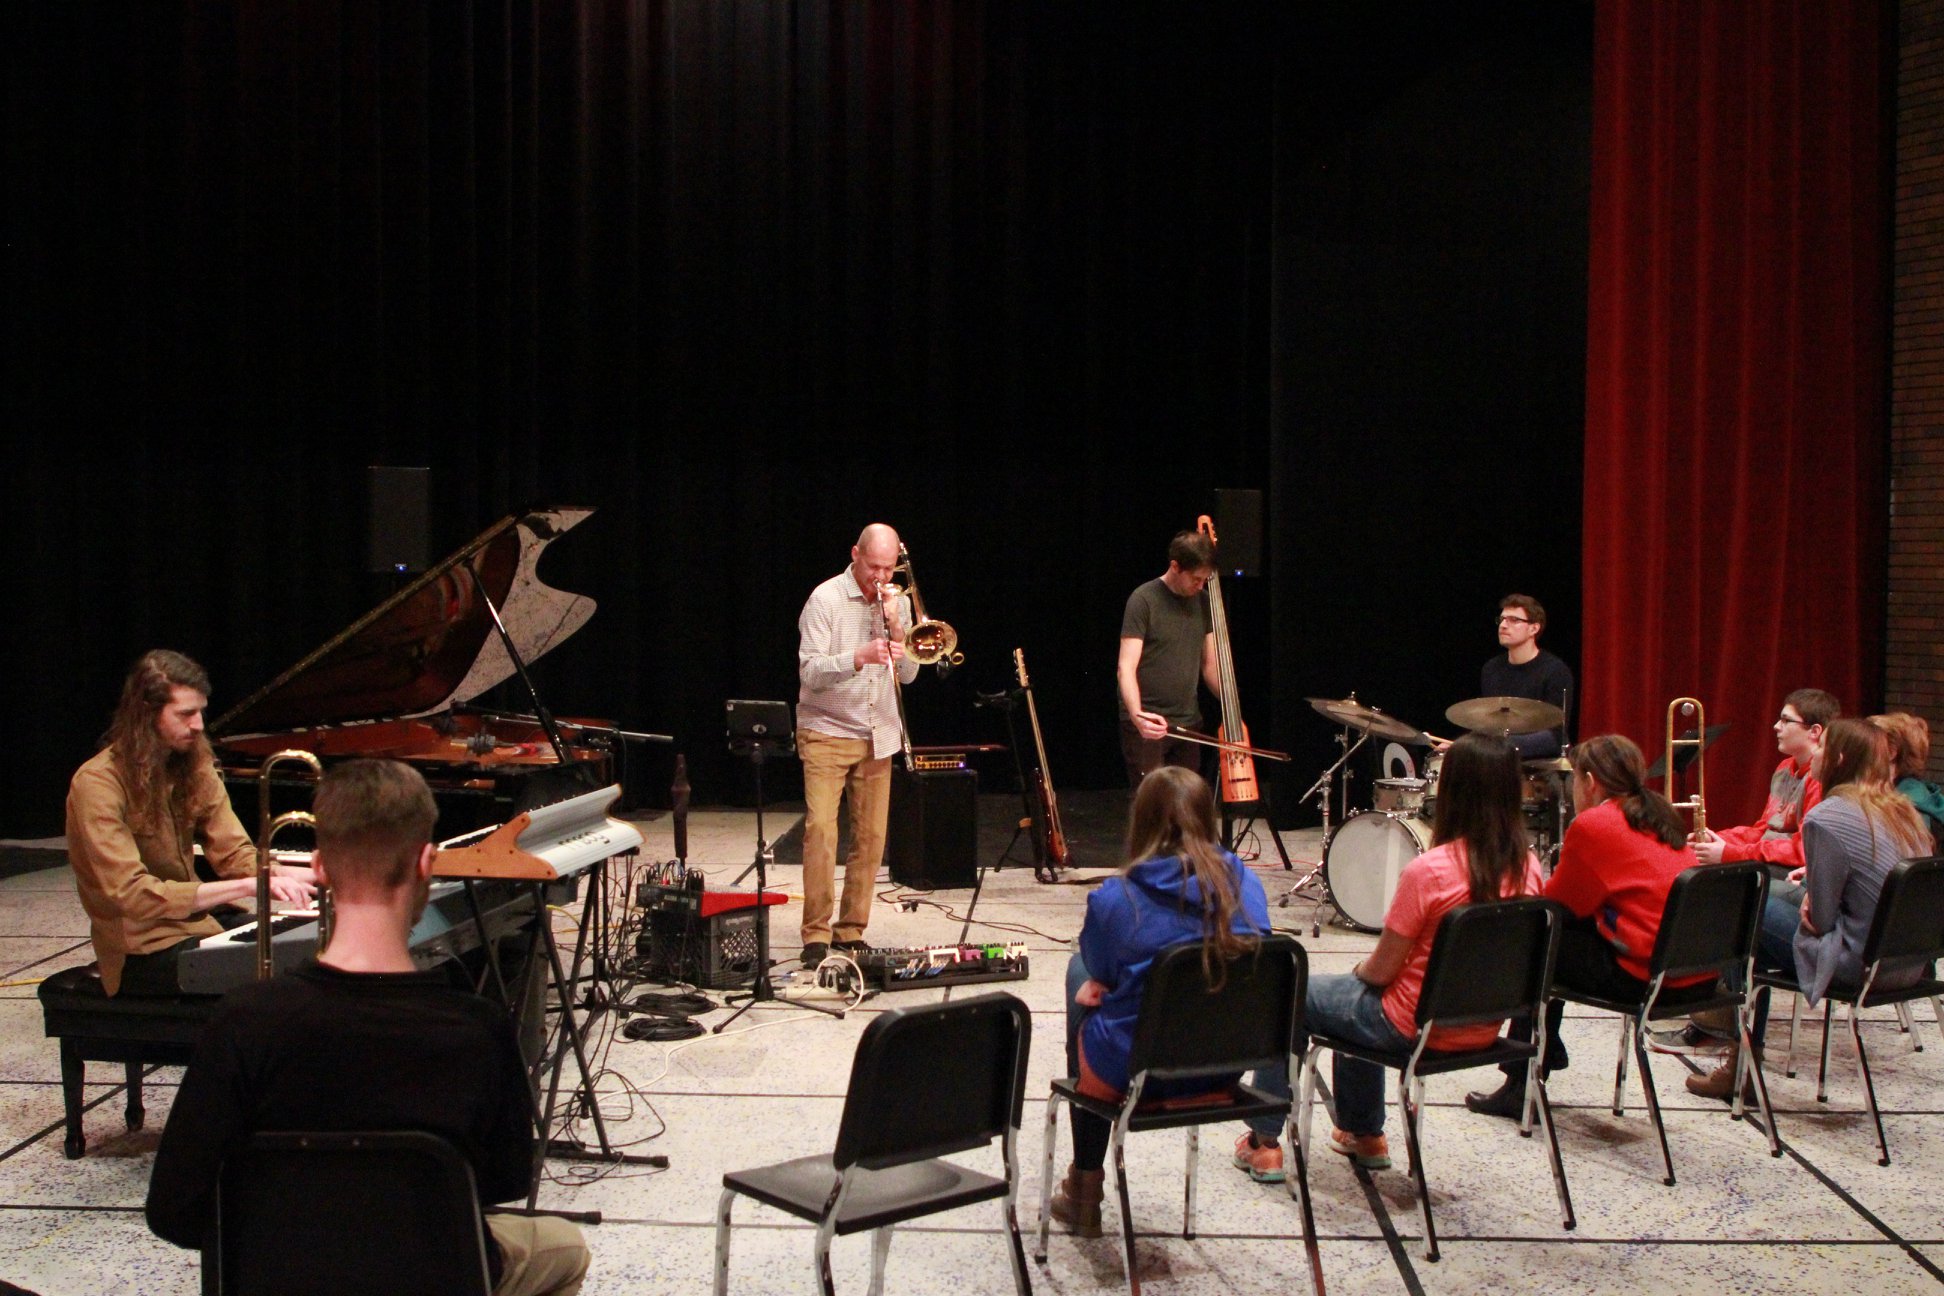 Mark Hetzler and Mr. Chair performing and working with students during Brassapalooza